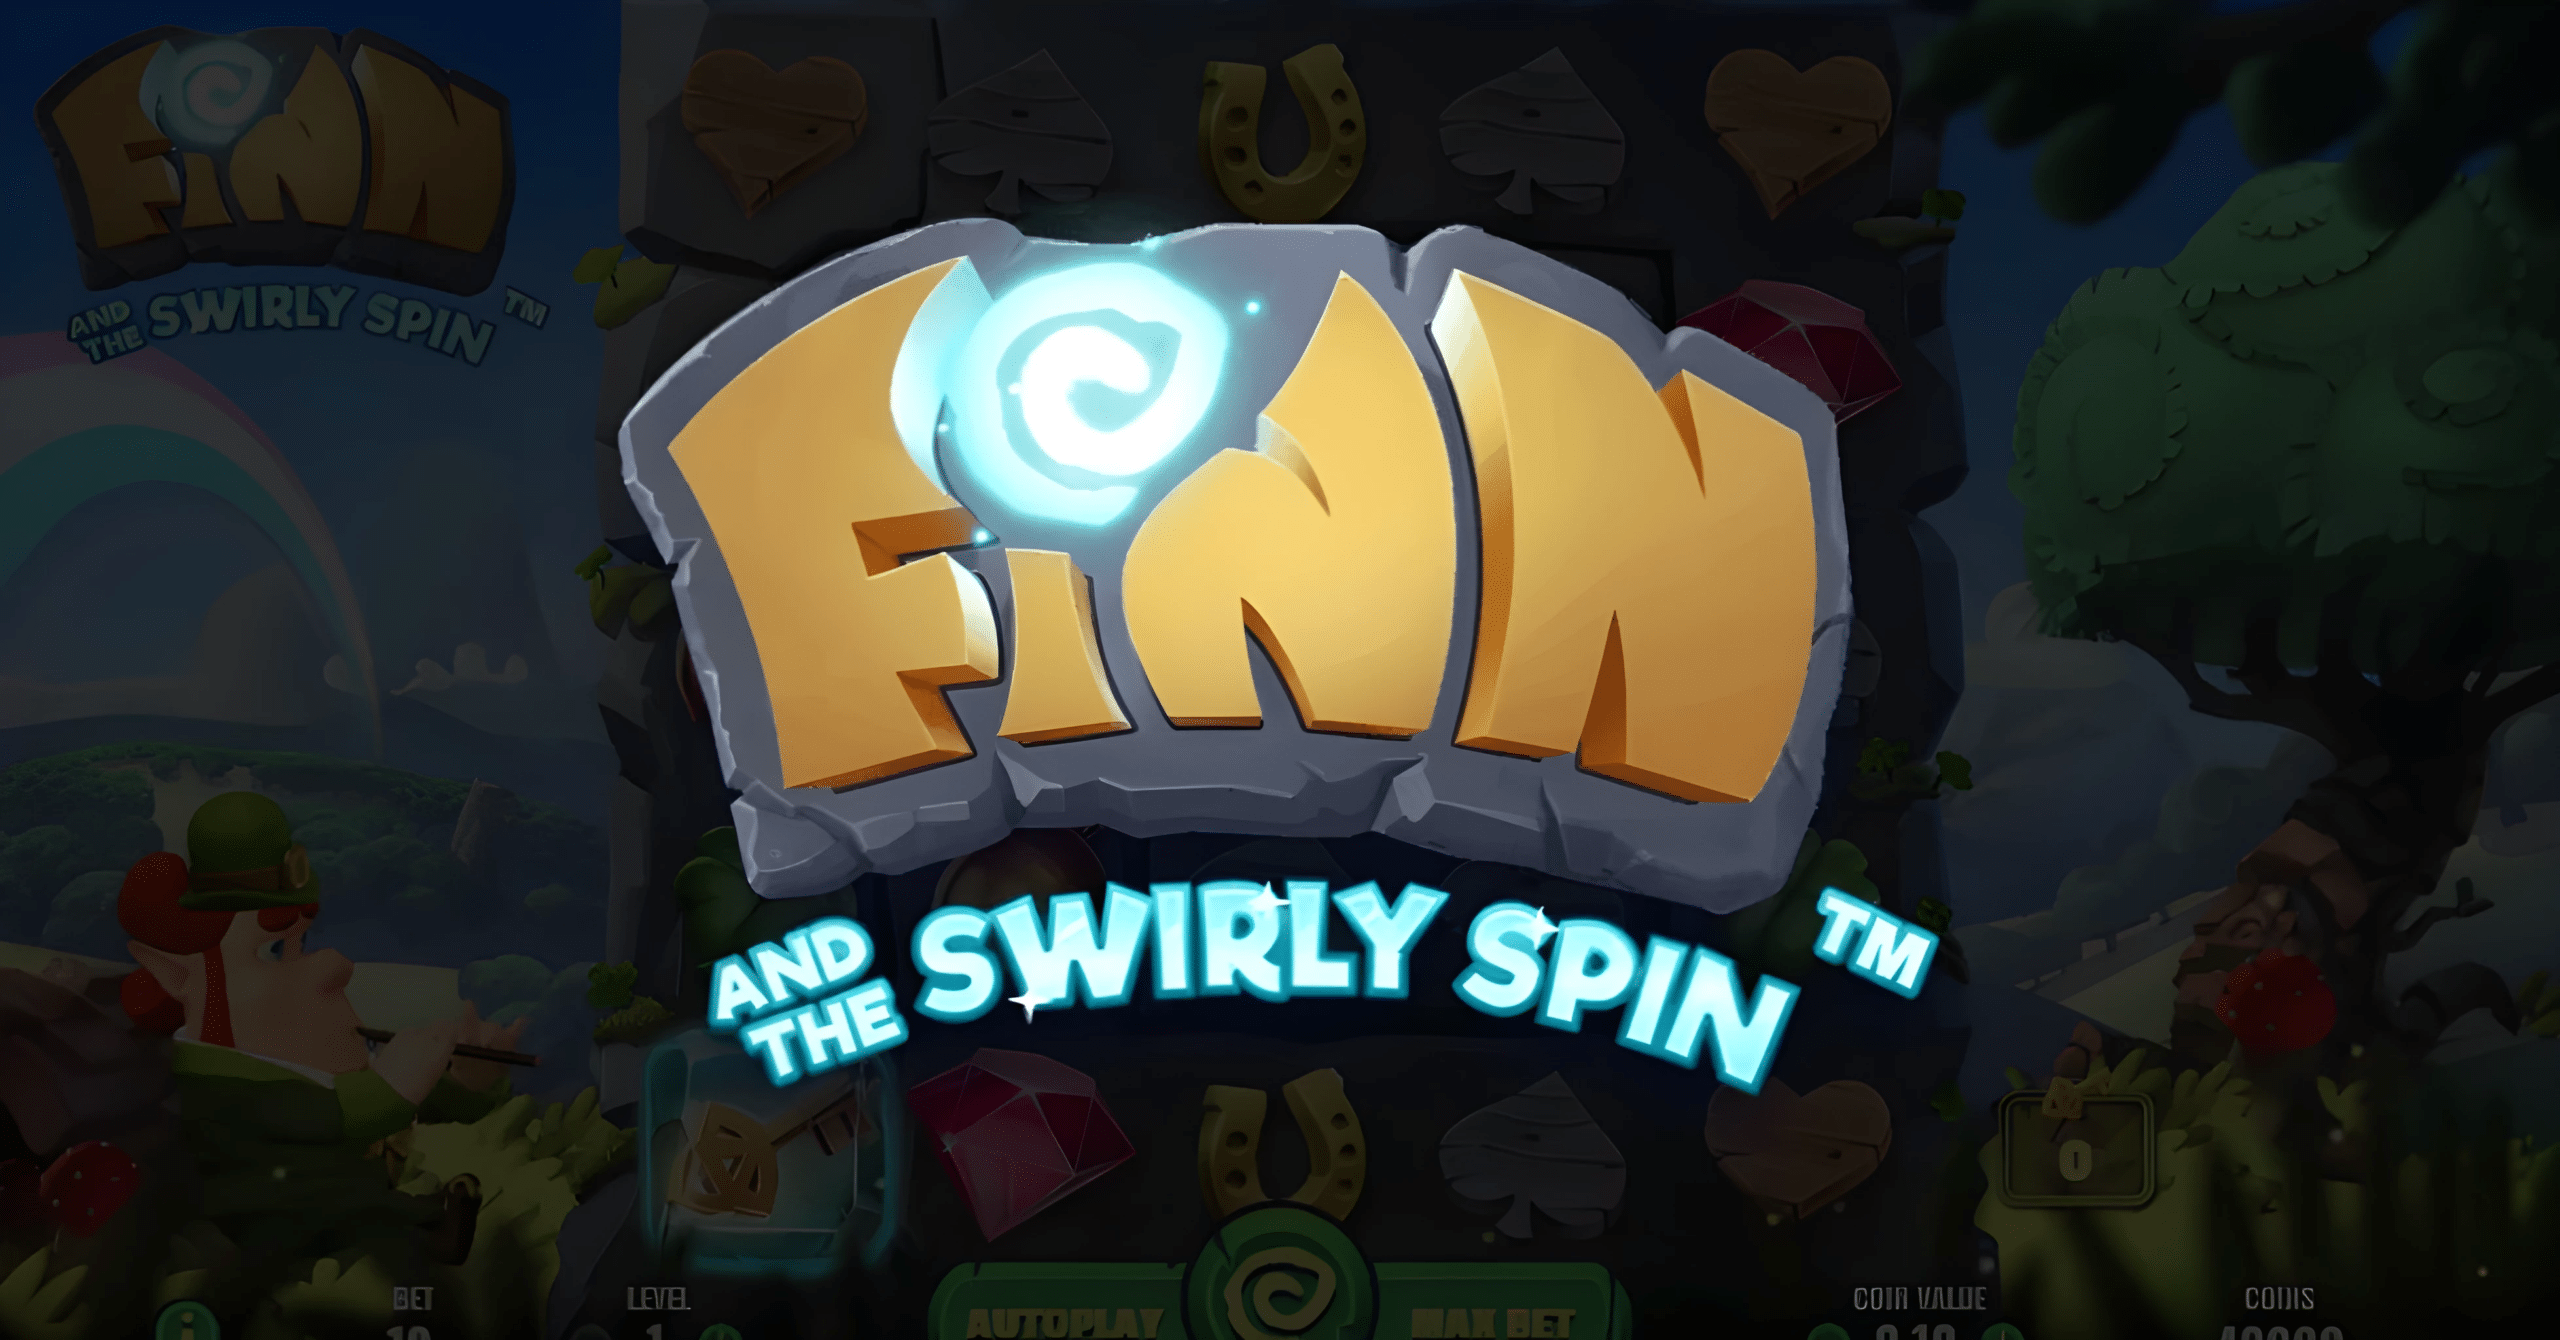 Finn and the Swirly Spin Slot: Charming Wins on The Reels